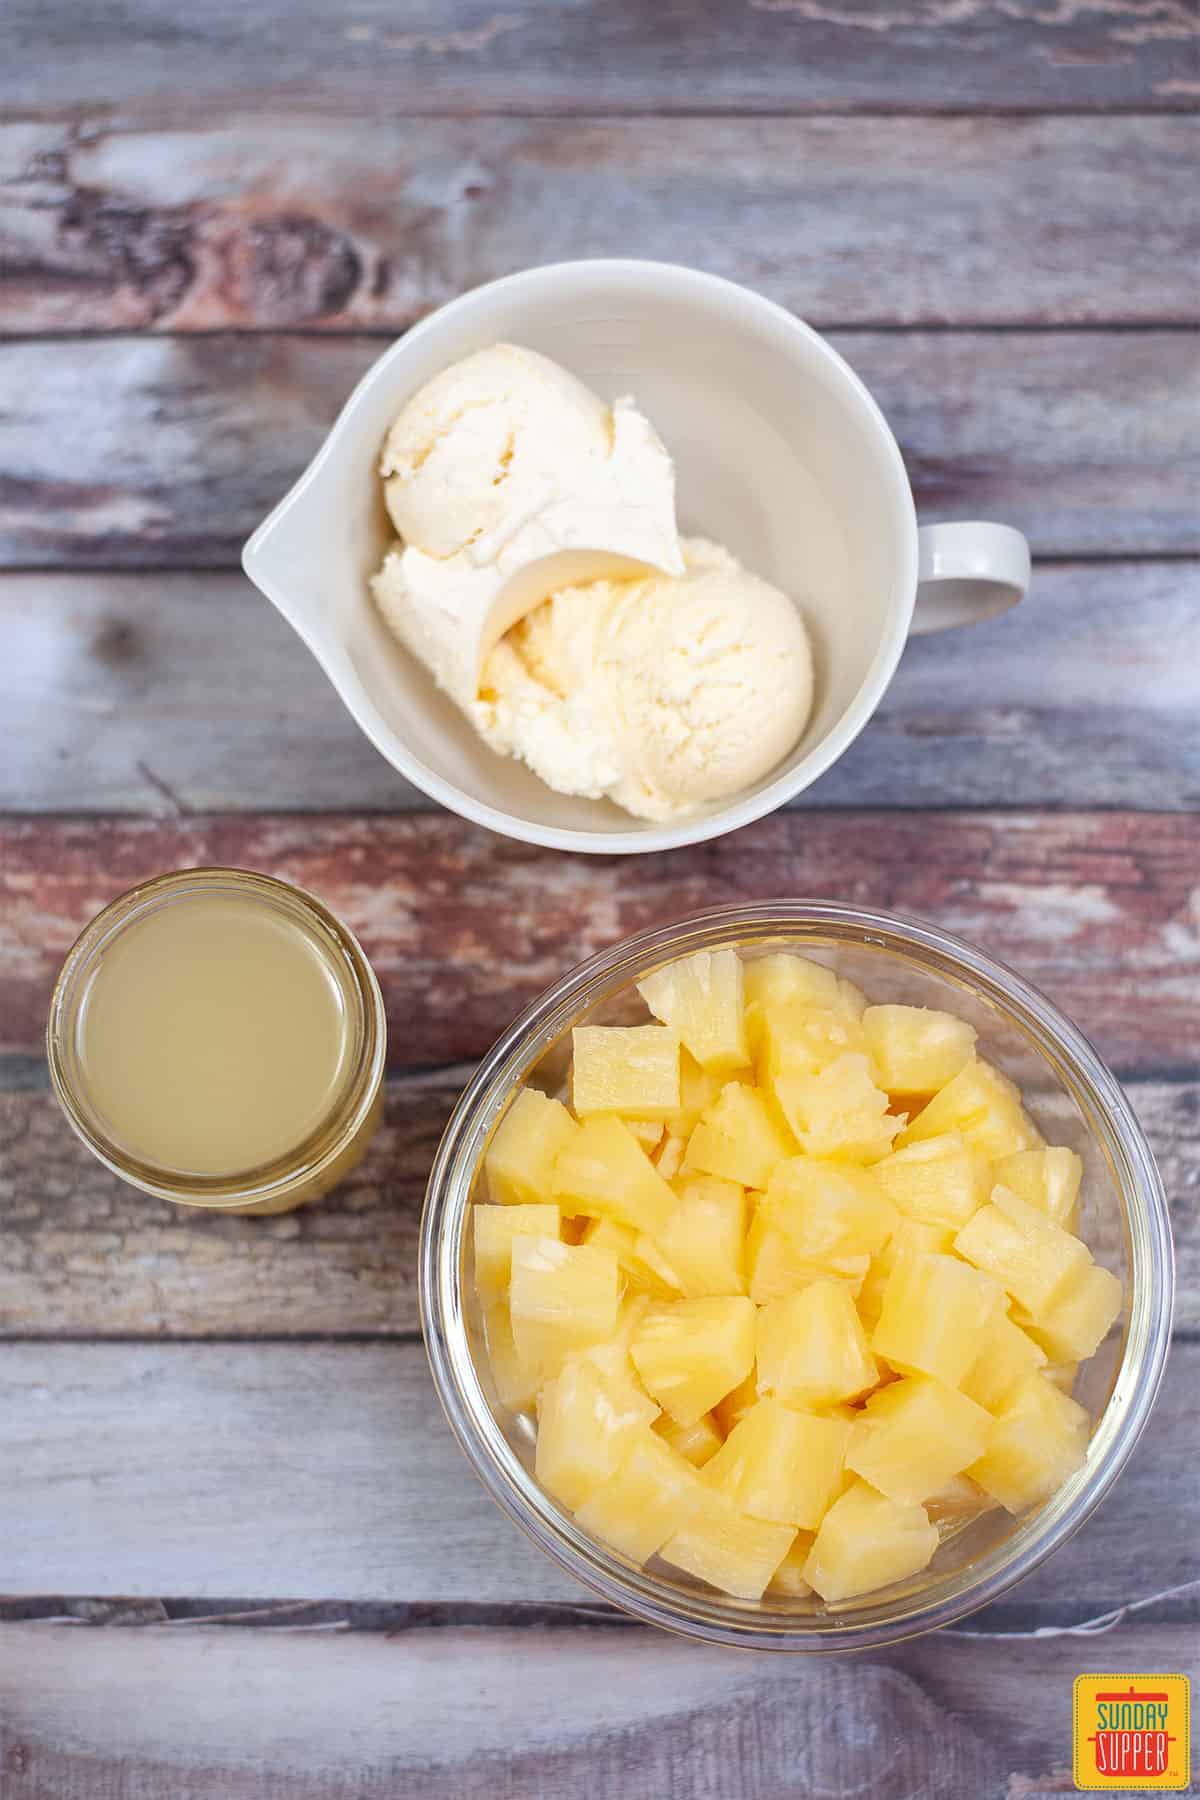 Dole whip ingredients in bowls